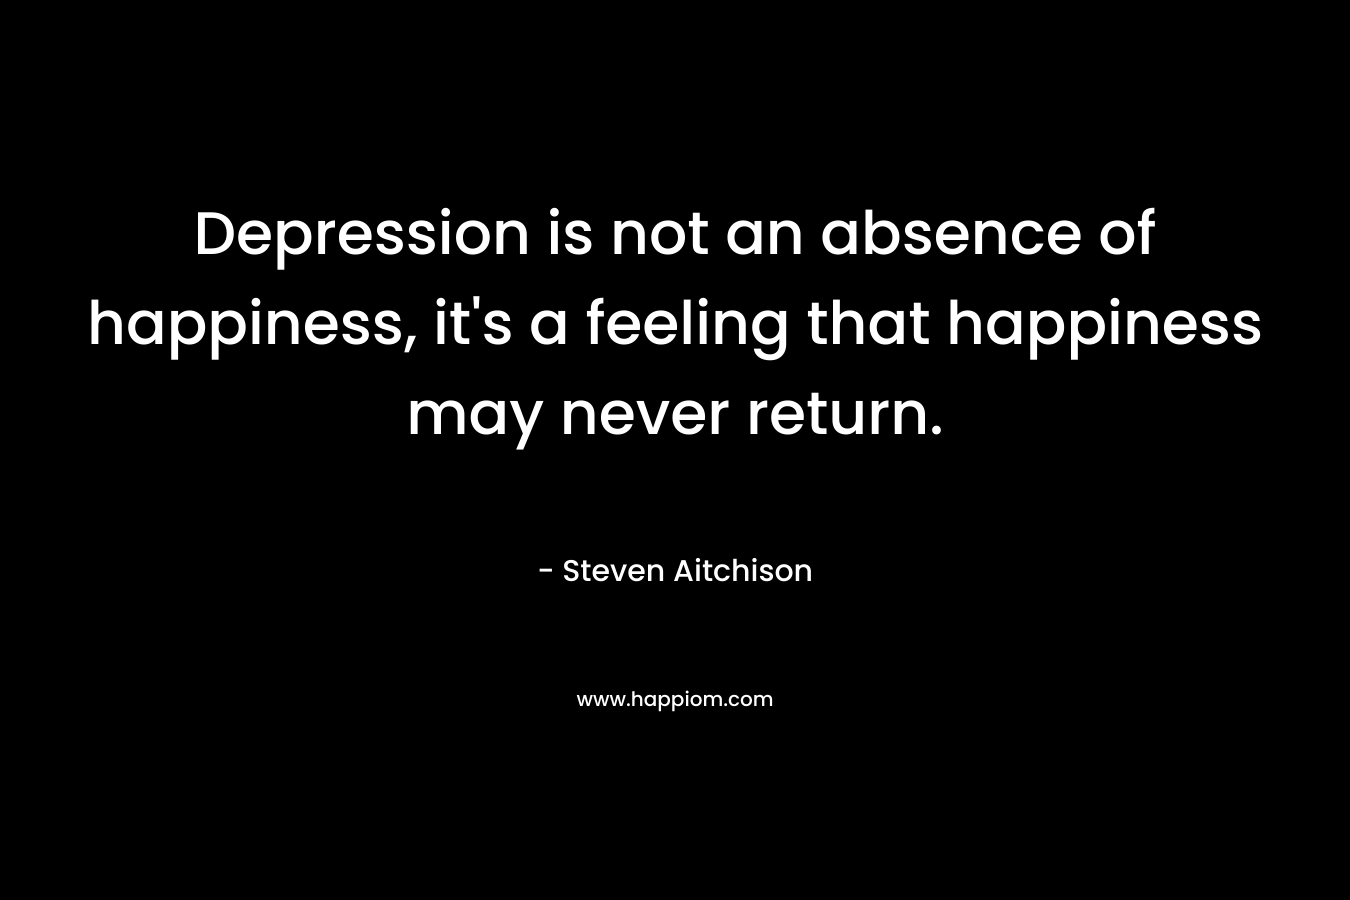 Depression is not an absence of happiness, it's a feeling that happiness may never return.